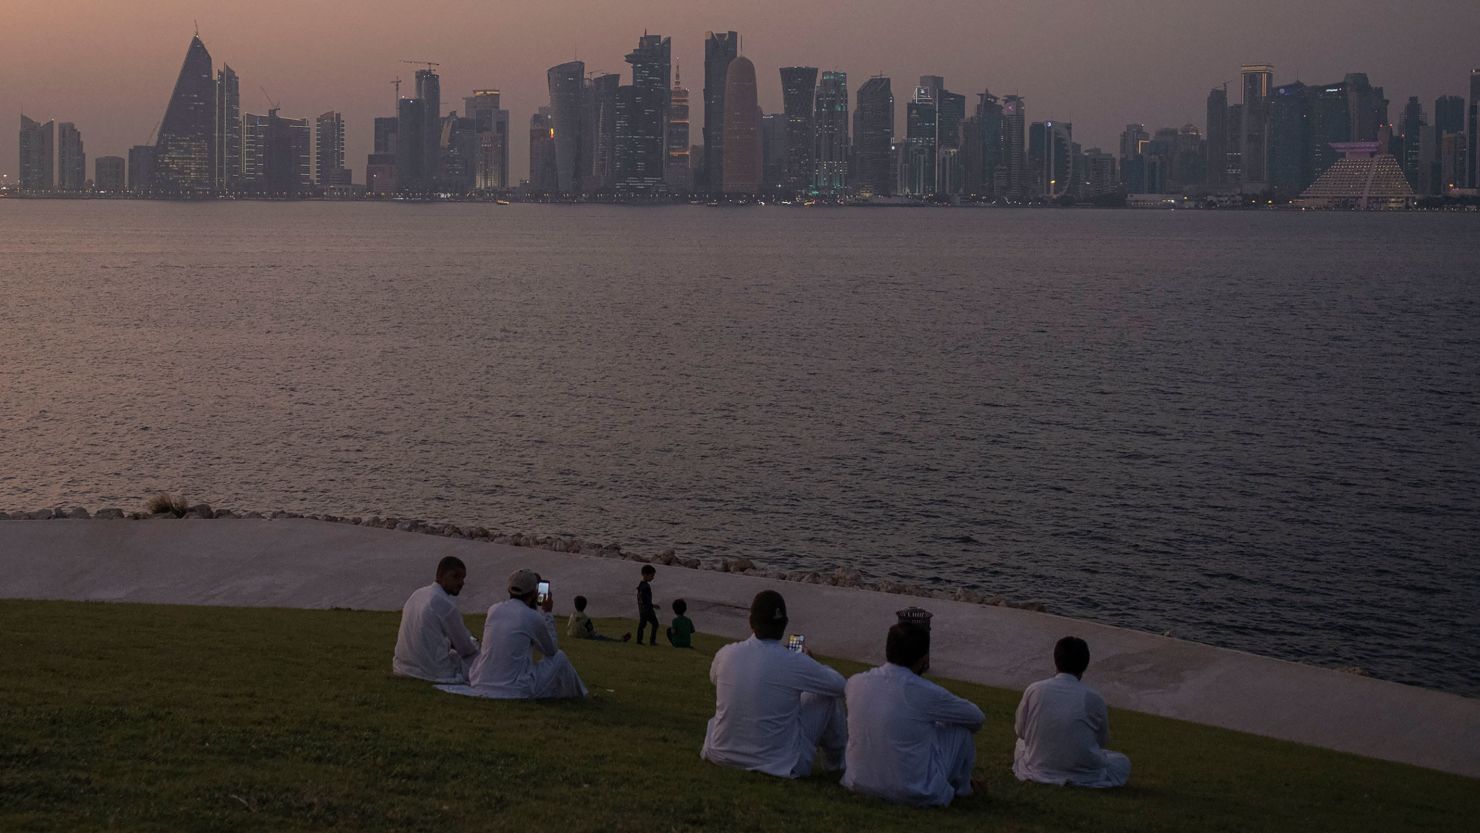 A view from MIA Park, overlooking the city skyline in Doha, Qatar.